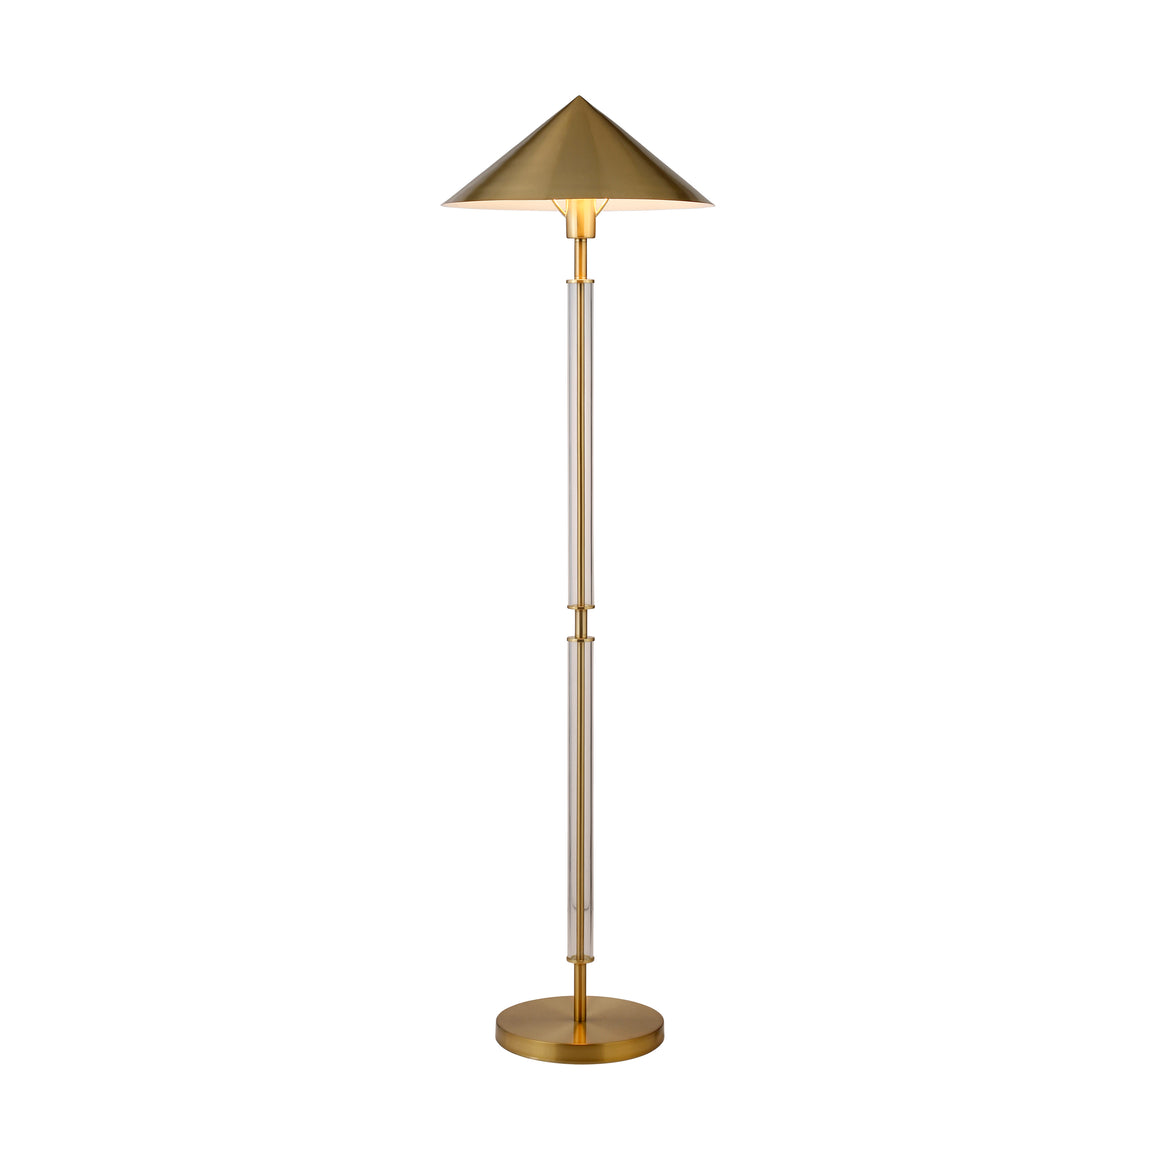 Floor Lamp with Acrylic Pole and Triangular Metal Shade in Brushed Brass